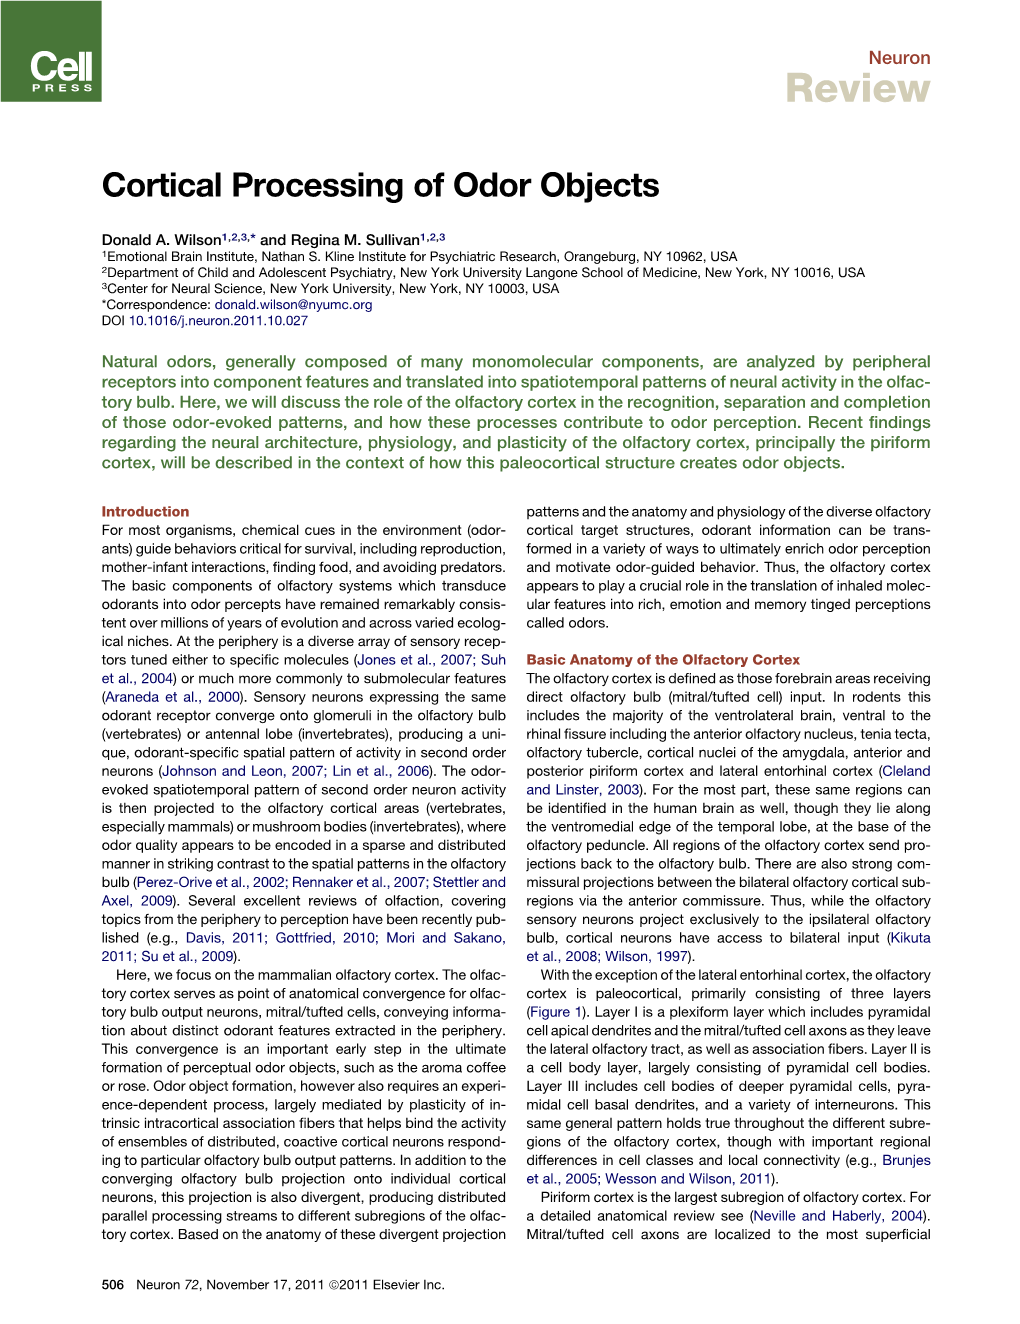 Cortical Processing of Odor Objects